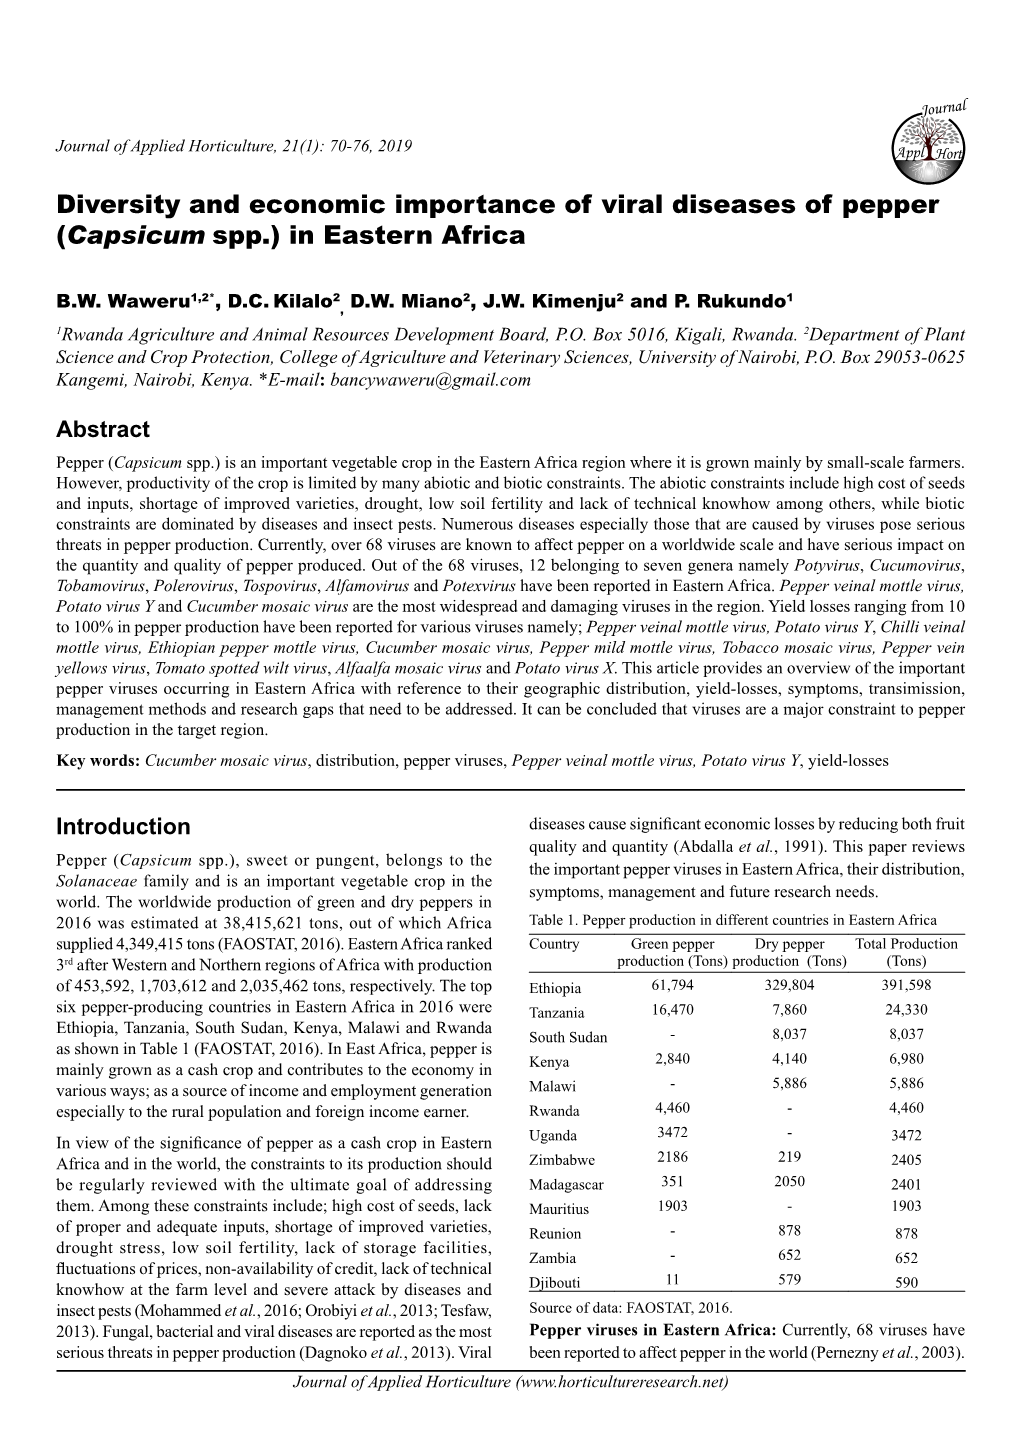 Diversity and Economic Importance of Viral Diseases of Pepper (Capsicum Spp.) in Eastern Africa